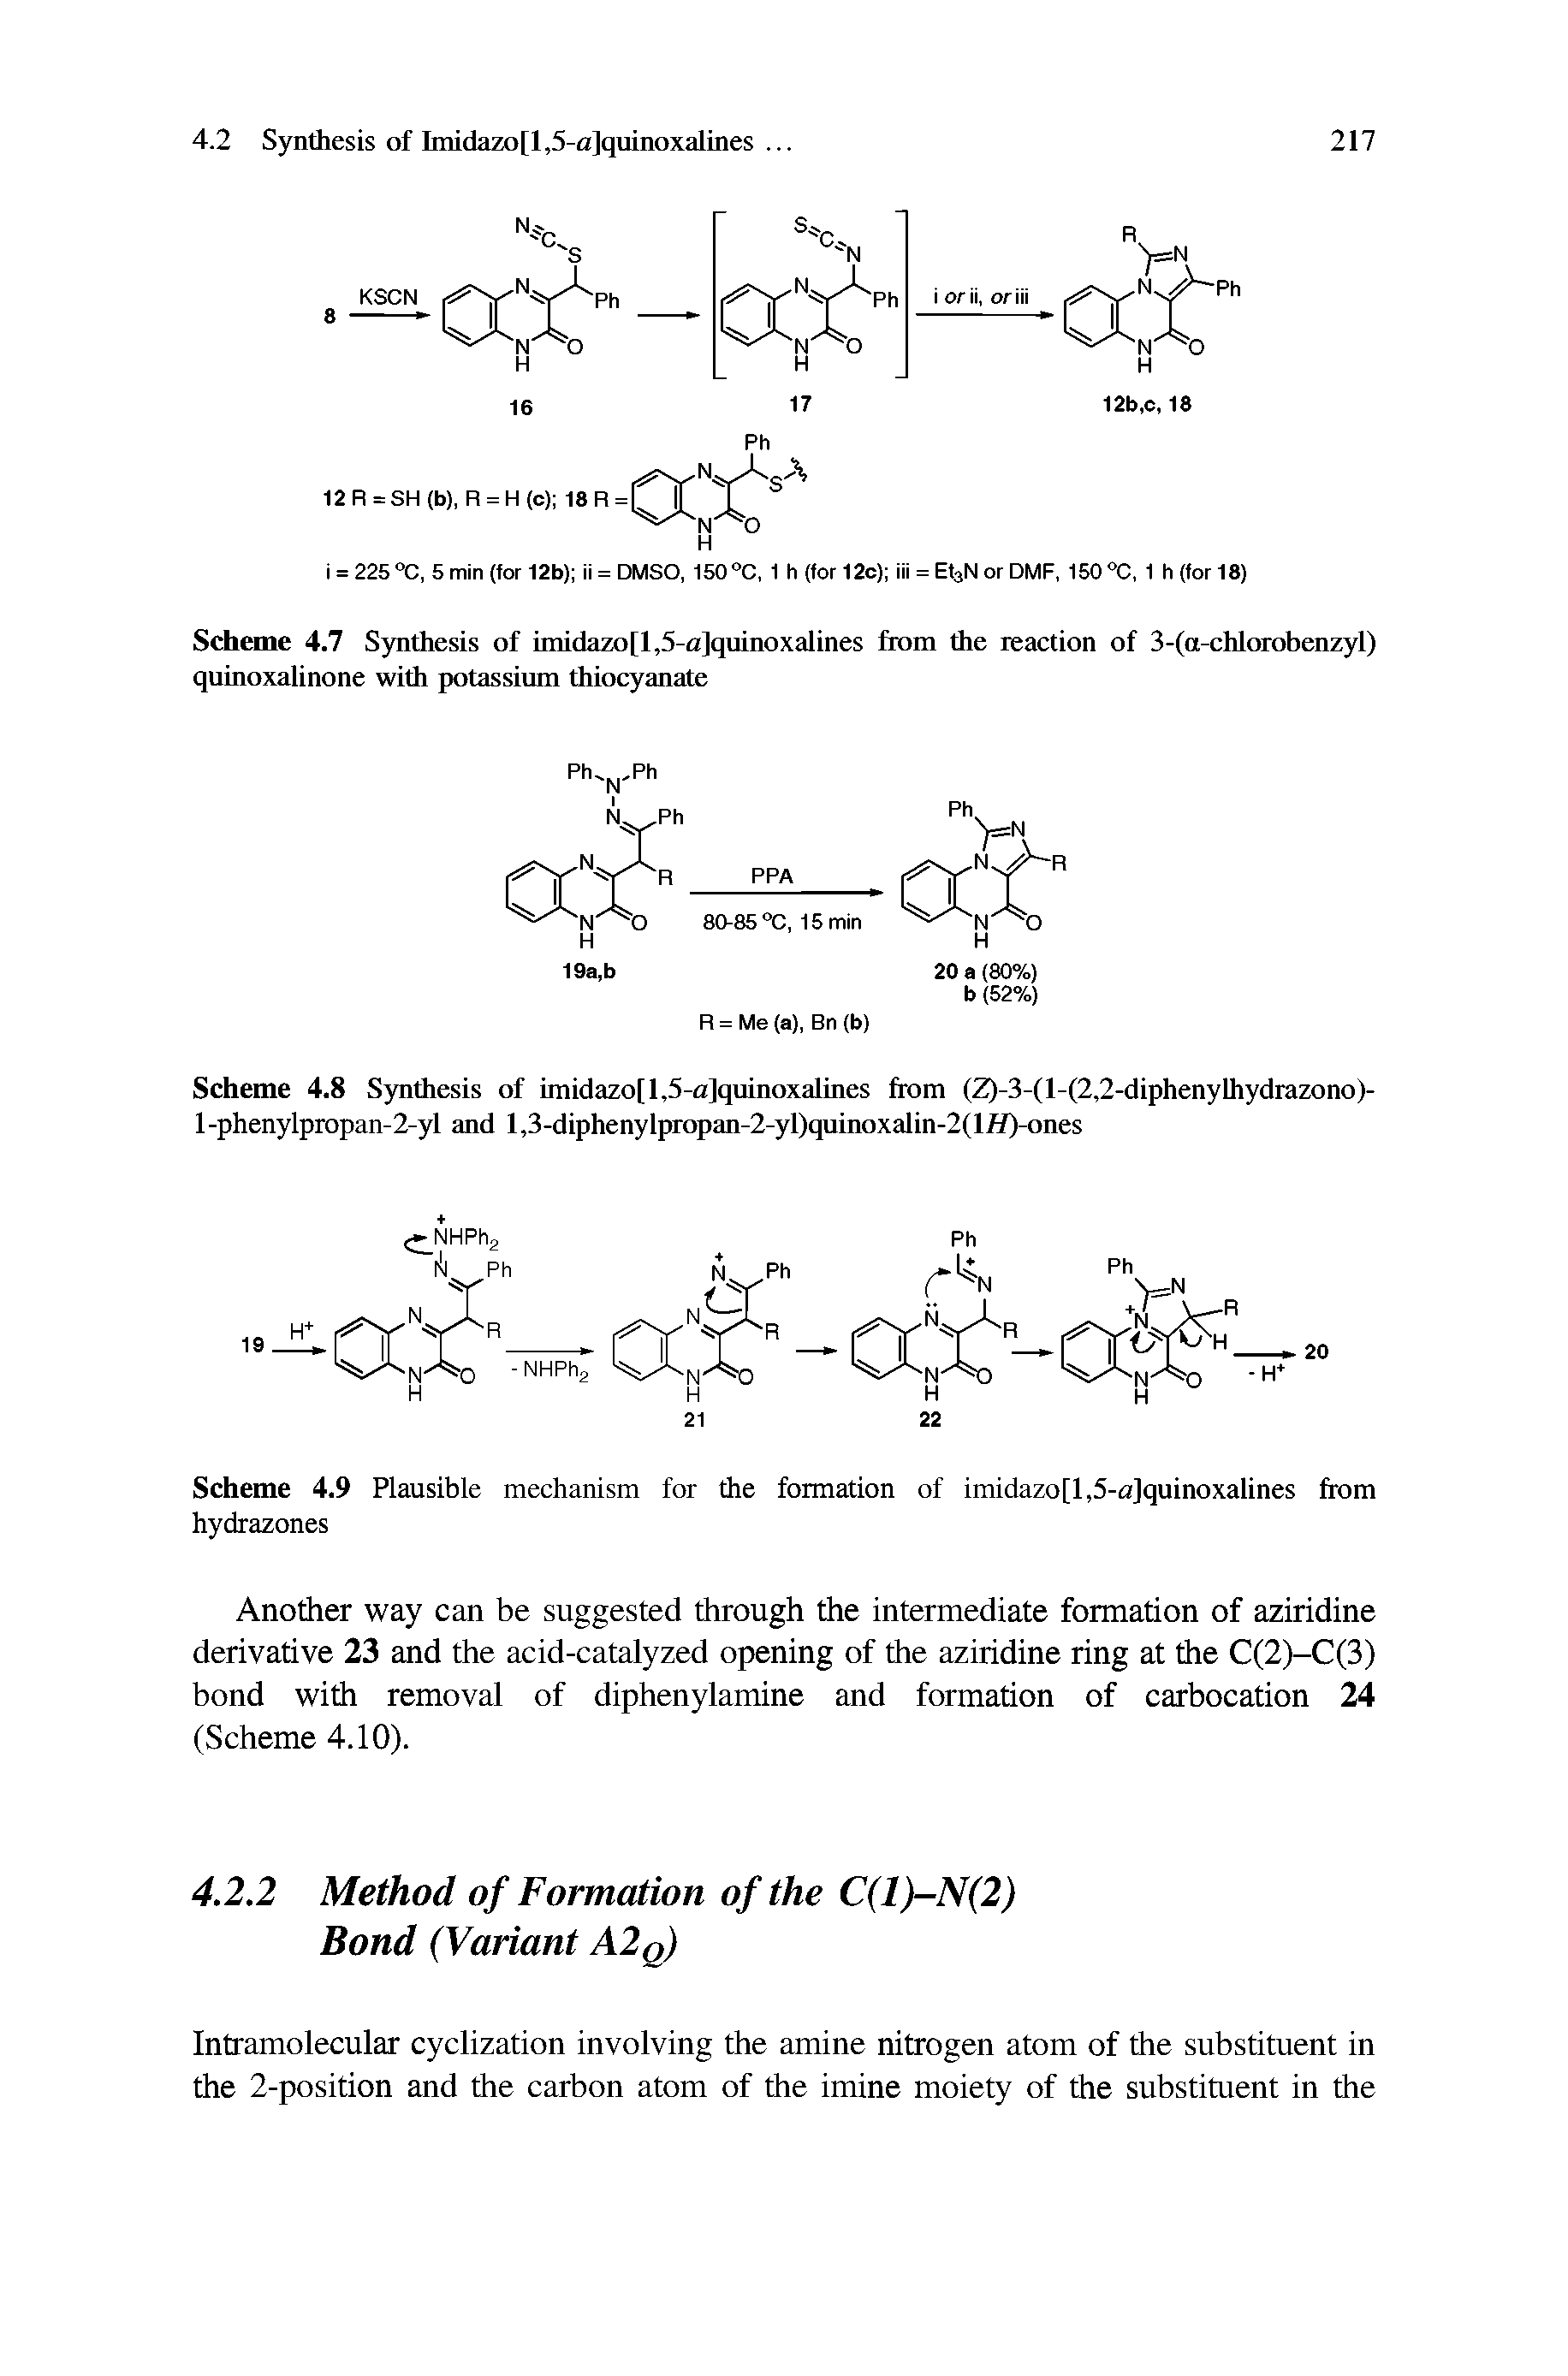 Scheme 4.7 S5oithesis of imidazo[l,5-a]quinoxalines from the reaction of 3-(a-chlorobenzyl) quinoxalinone with potassium thiocyanate...